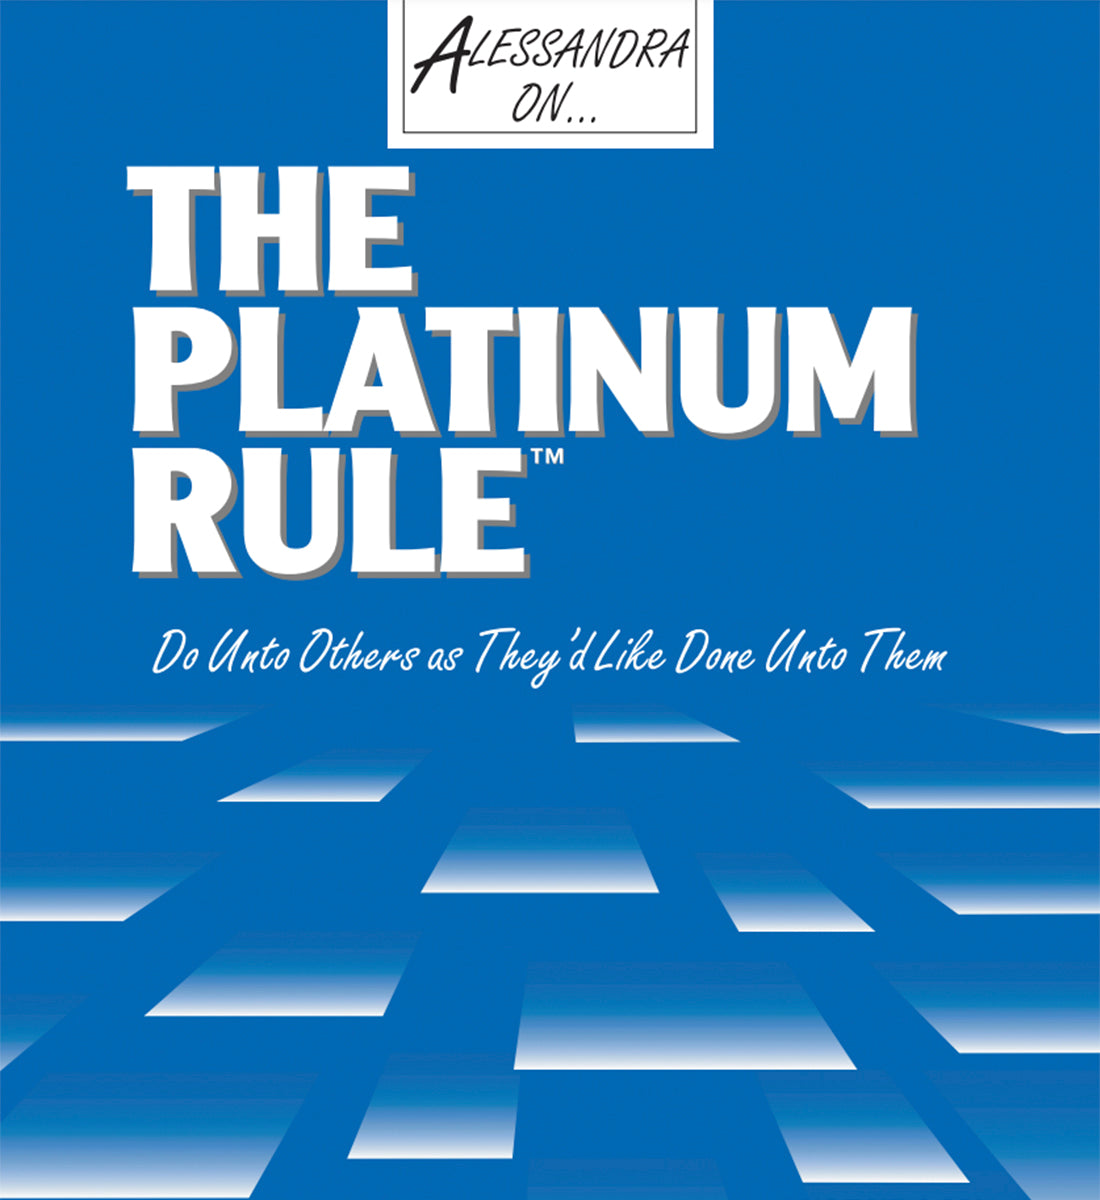 The Platinum Rule Self-Assessment Package - Paper Version $49.00 per person